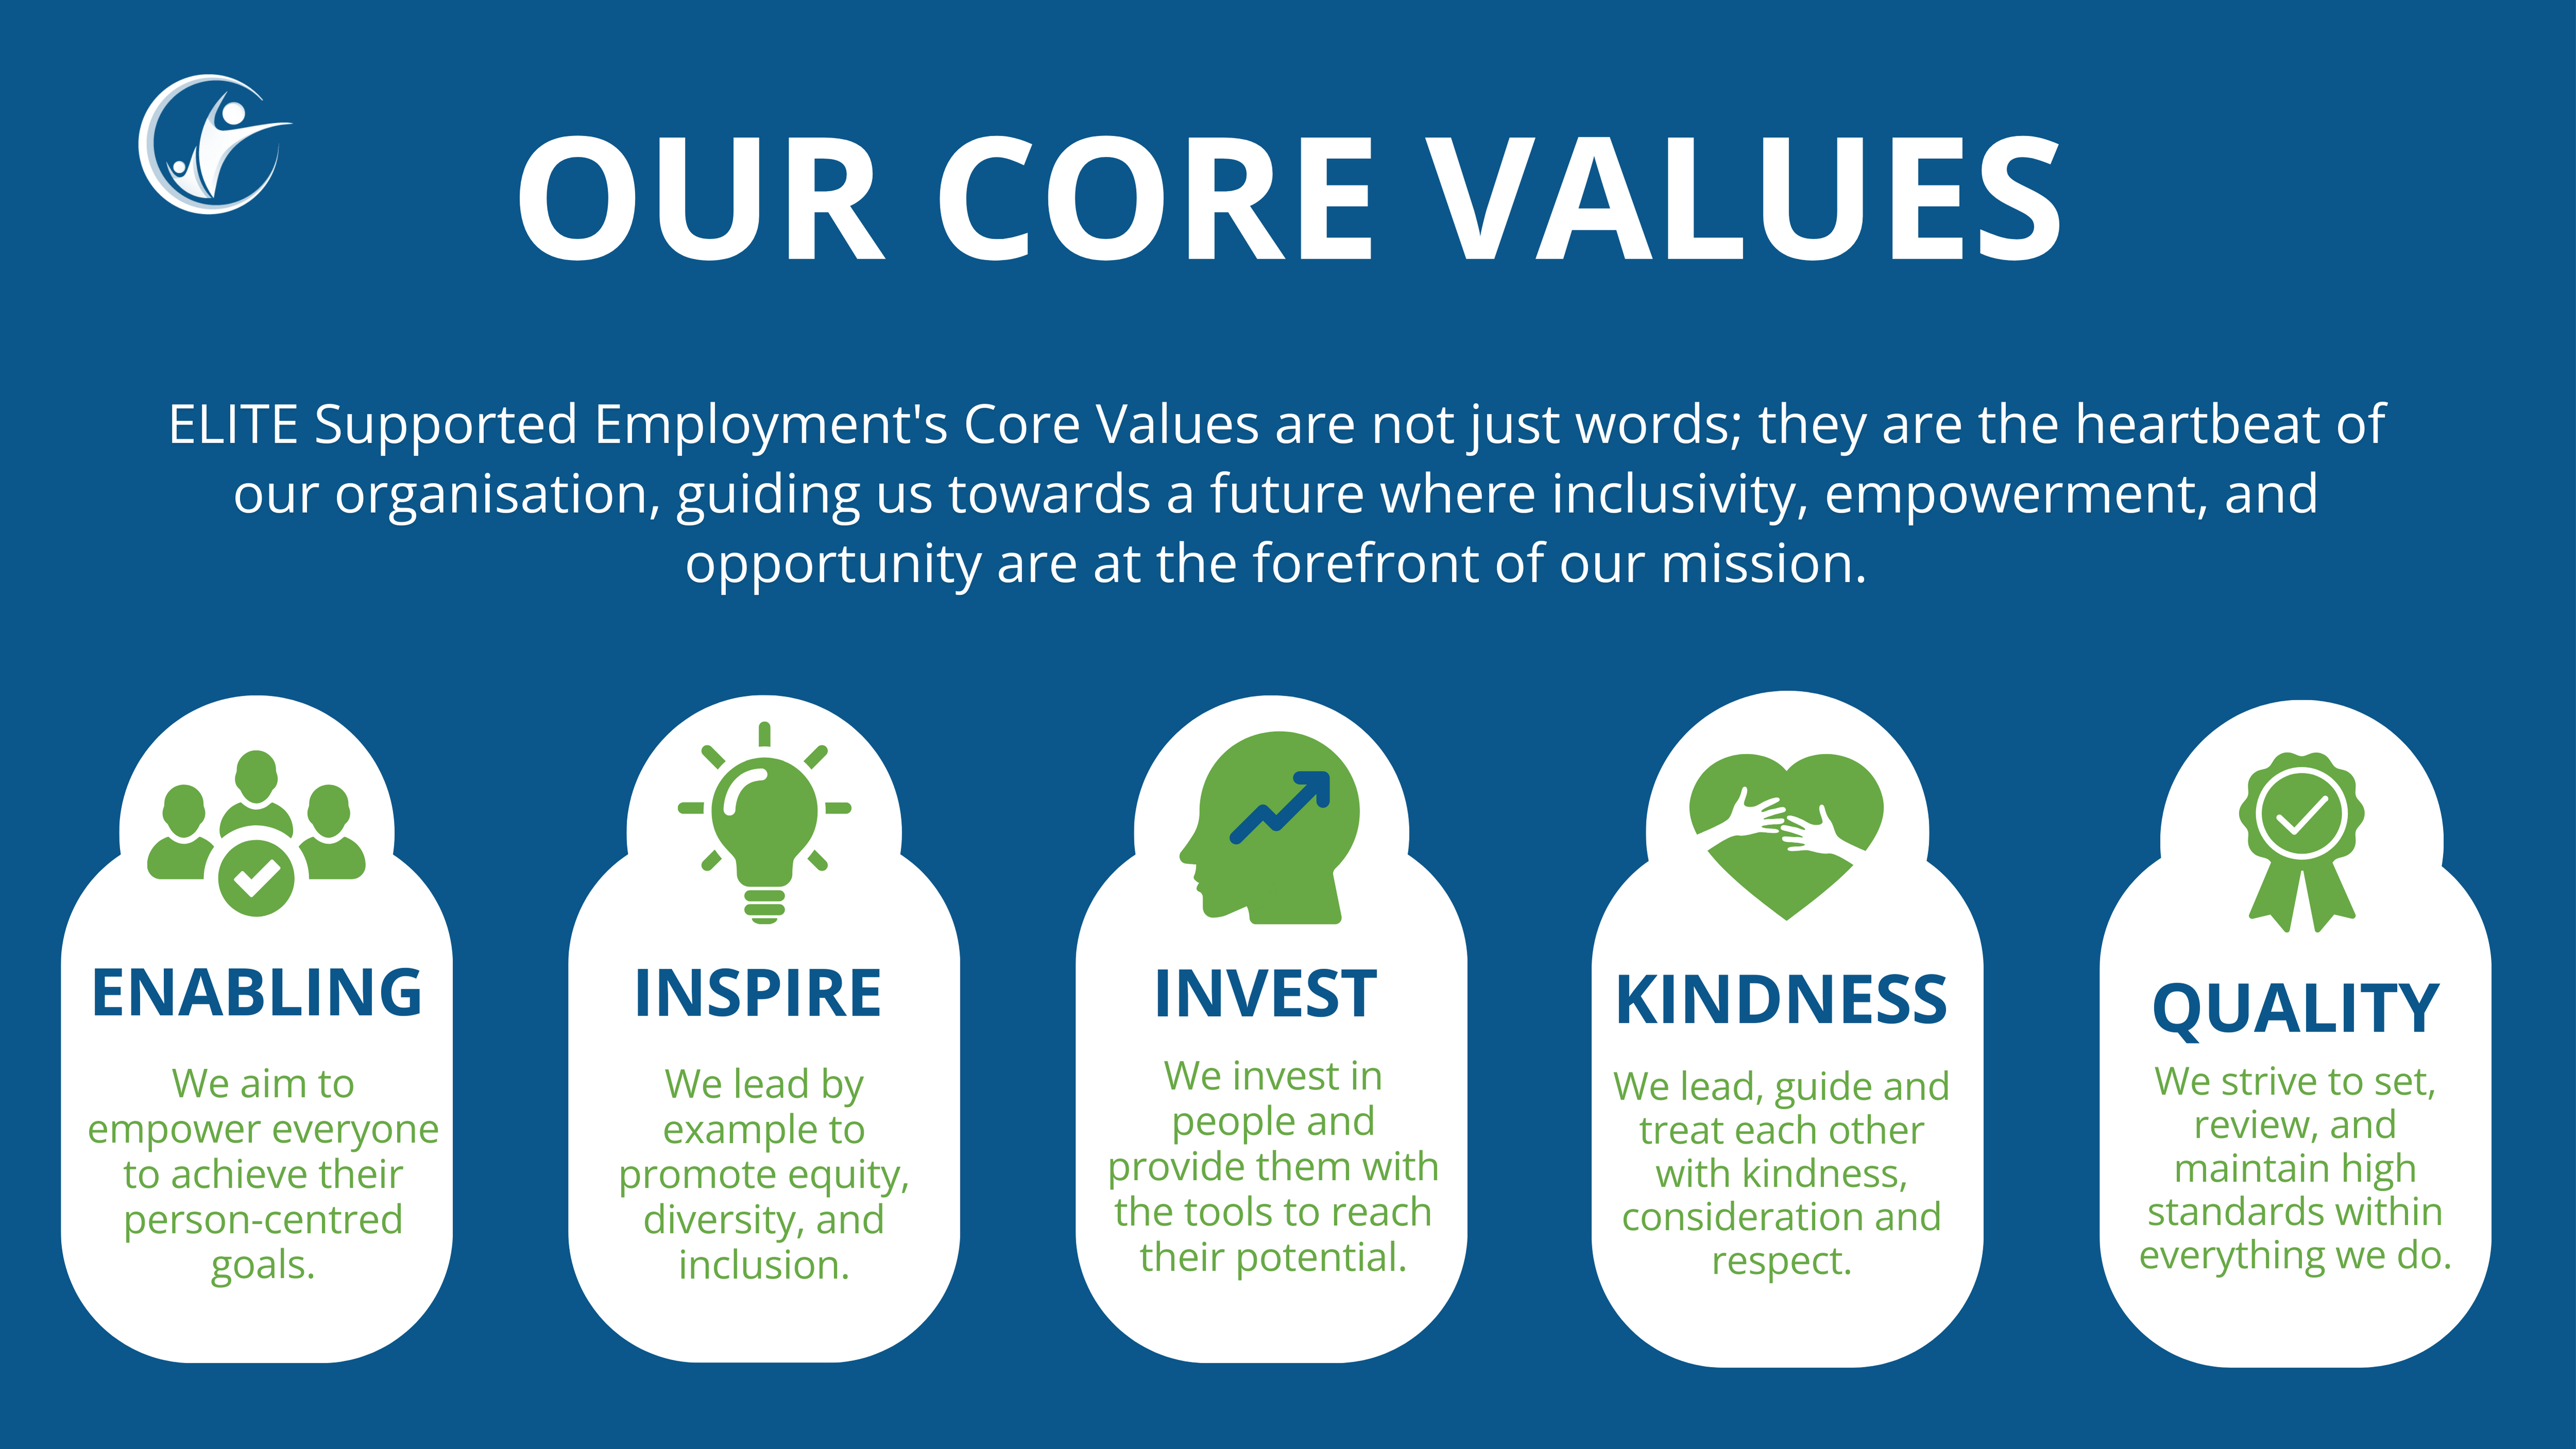 ELITE's Core Values are at the heart of everything we do. Values Are: Enabling Inspire Invest Kindness Quality